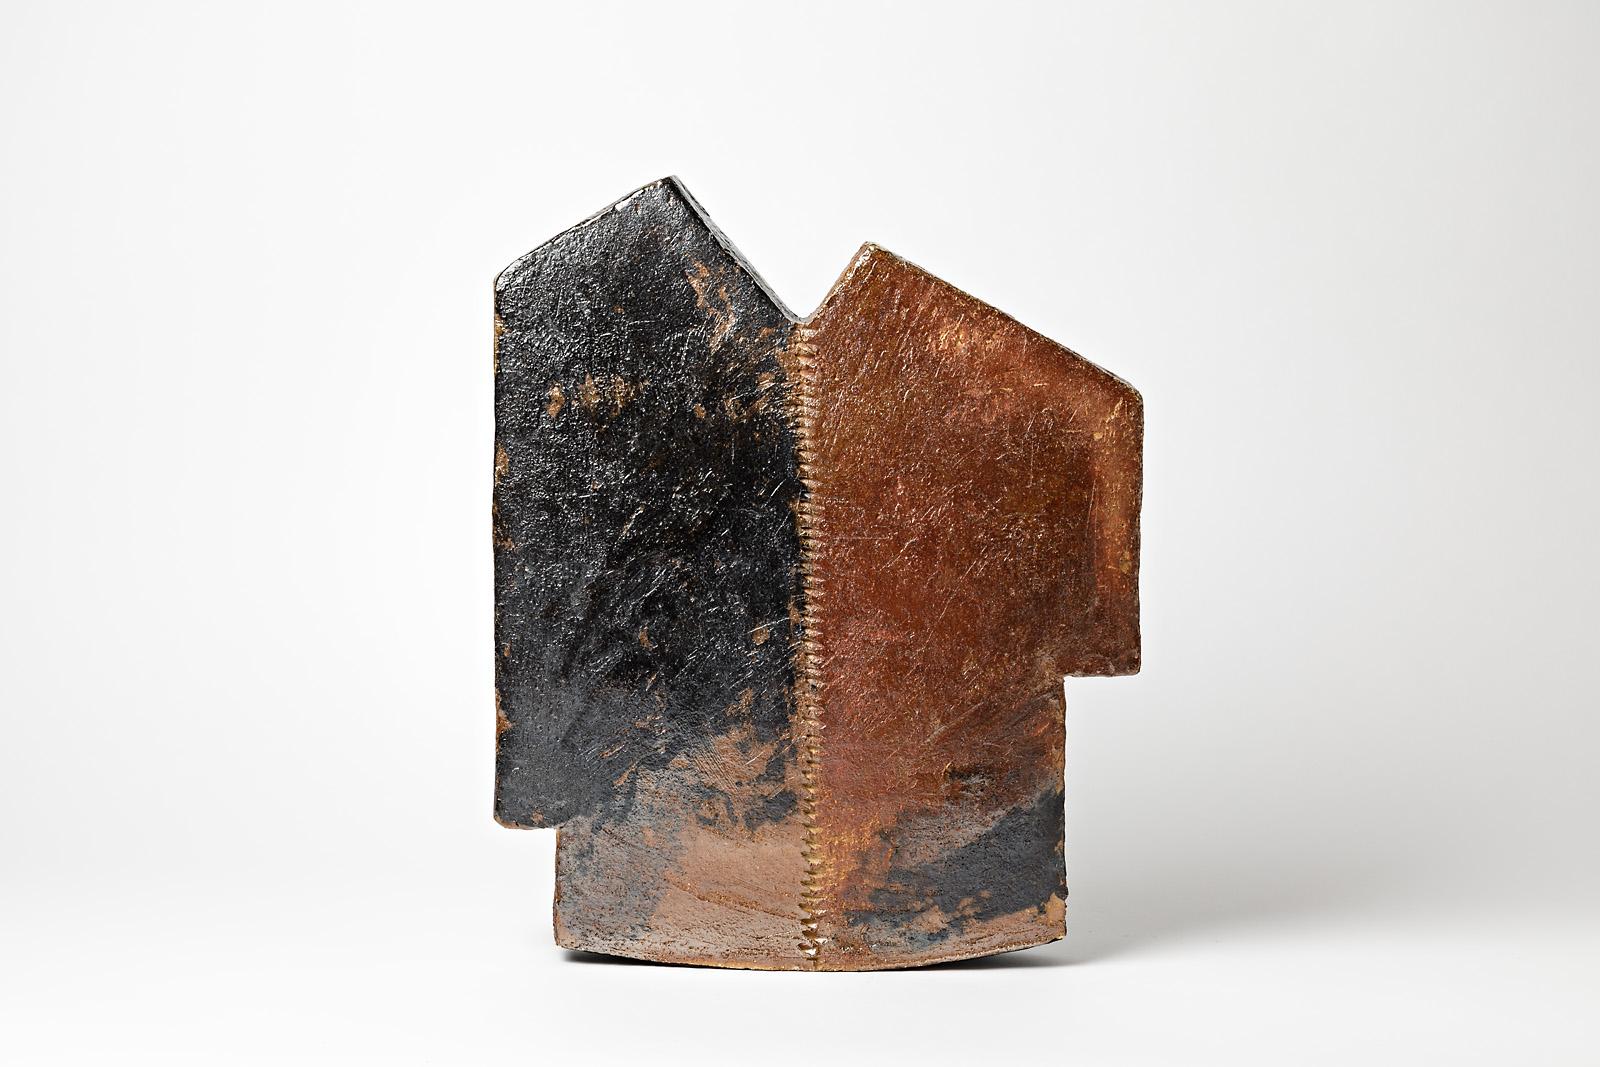 F Marechal

Important and exceptional stoneware ceramic sculpture.

Architectural form with brown and black ceramic form.

Beautiful ceramic glaze effect, realised in a fire kiln.

Realised in La Borne

Signed at the base.

Dimensions: